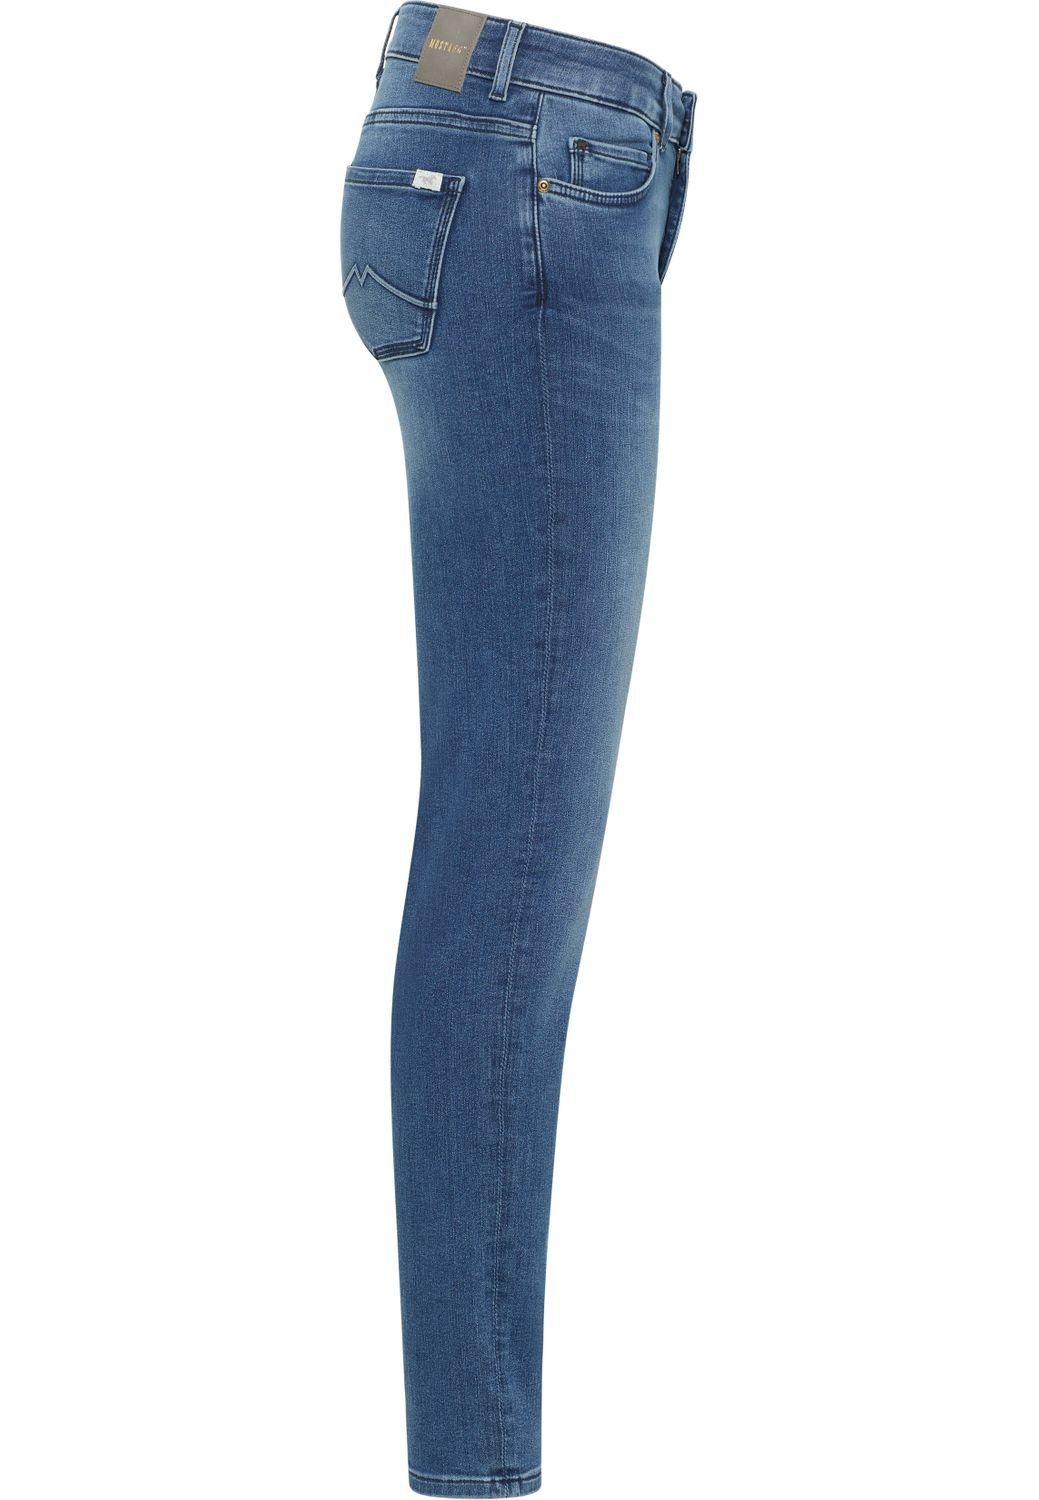 MUSTANG Relax-fit-Jeans mit Stretch CROSBY